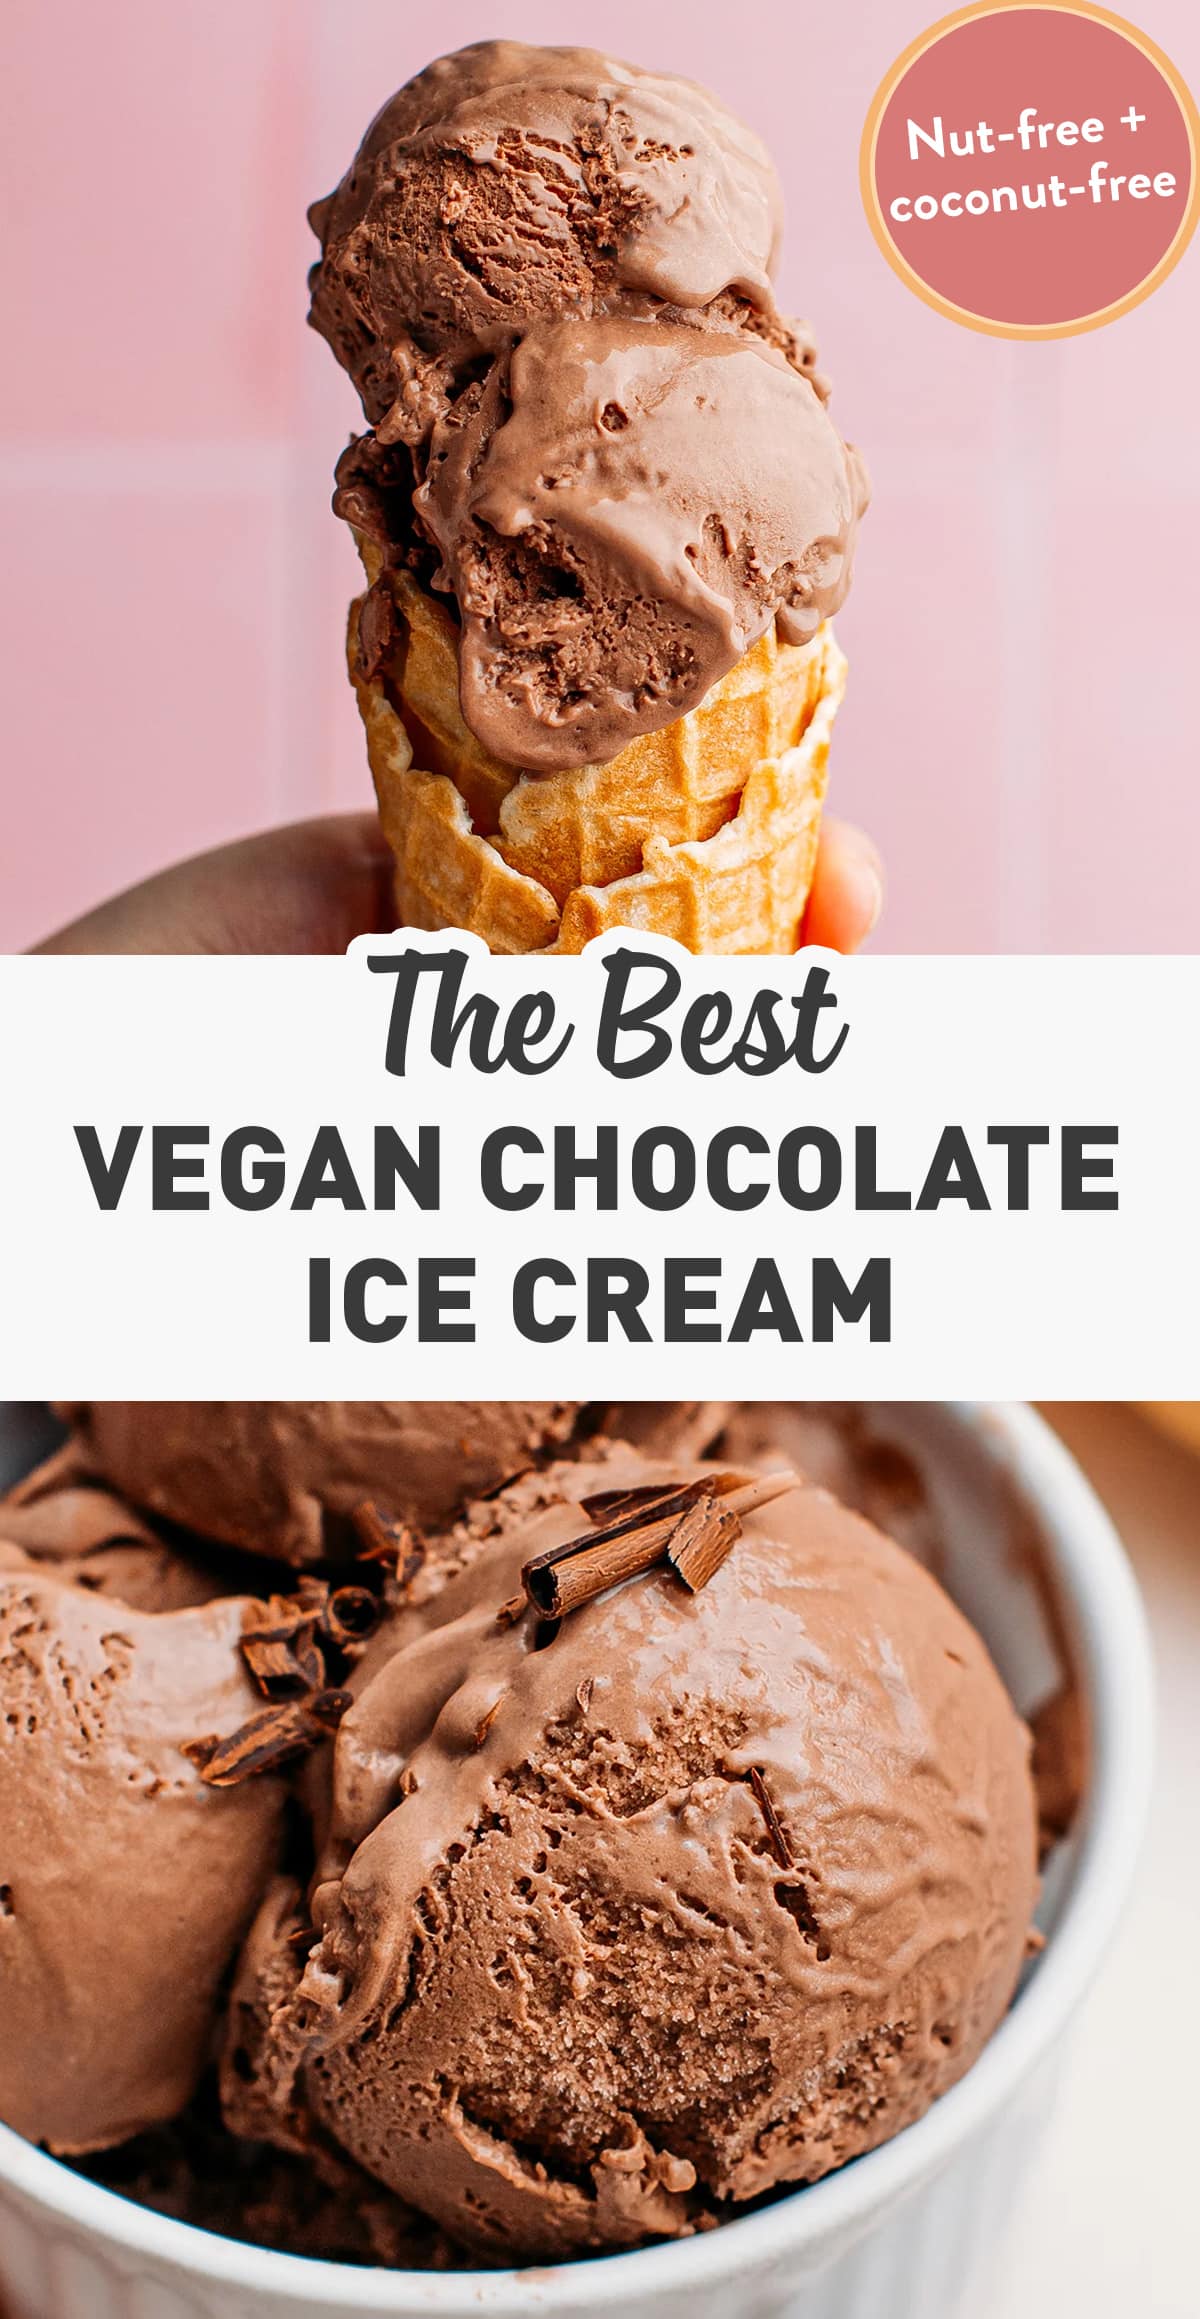 Truly the best vegan chocolate ice cream! It's insanely creamy, packed with a rich chocolate flavor, and scoopable straight from the freezer. Plus, it's coconut-free and nut-free. You will never buy vegan ice cream at the store again! #icecream #vegan